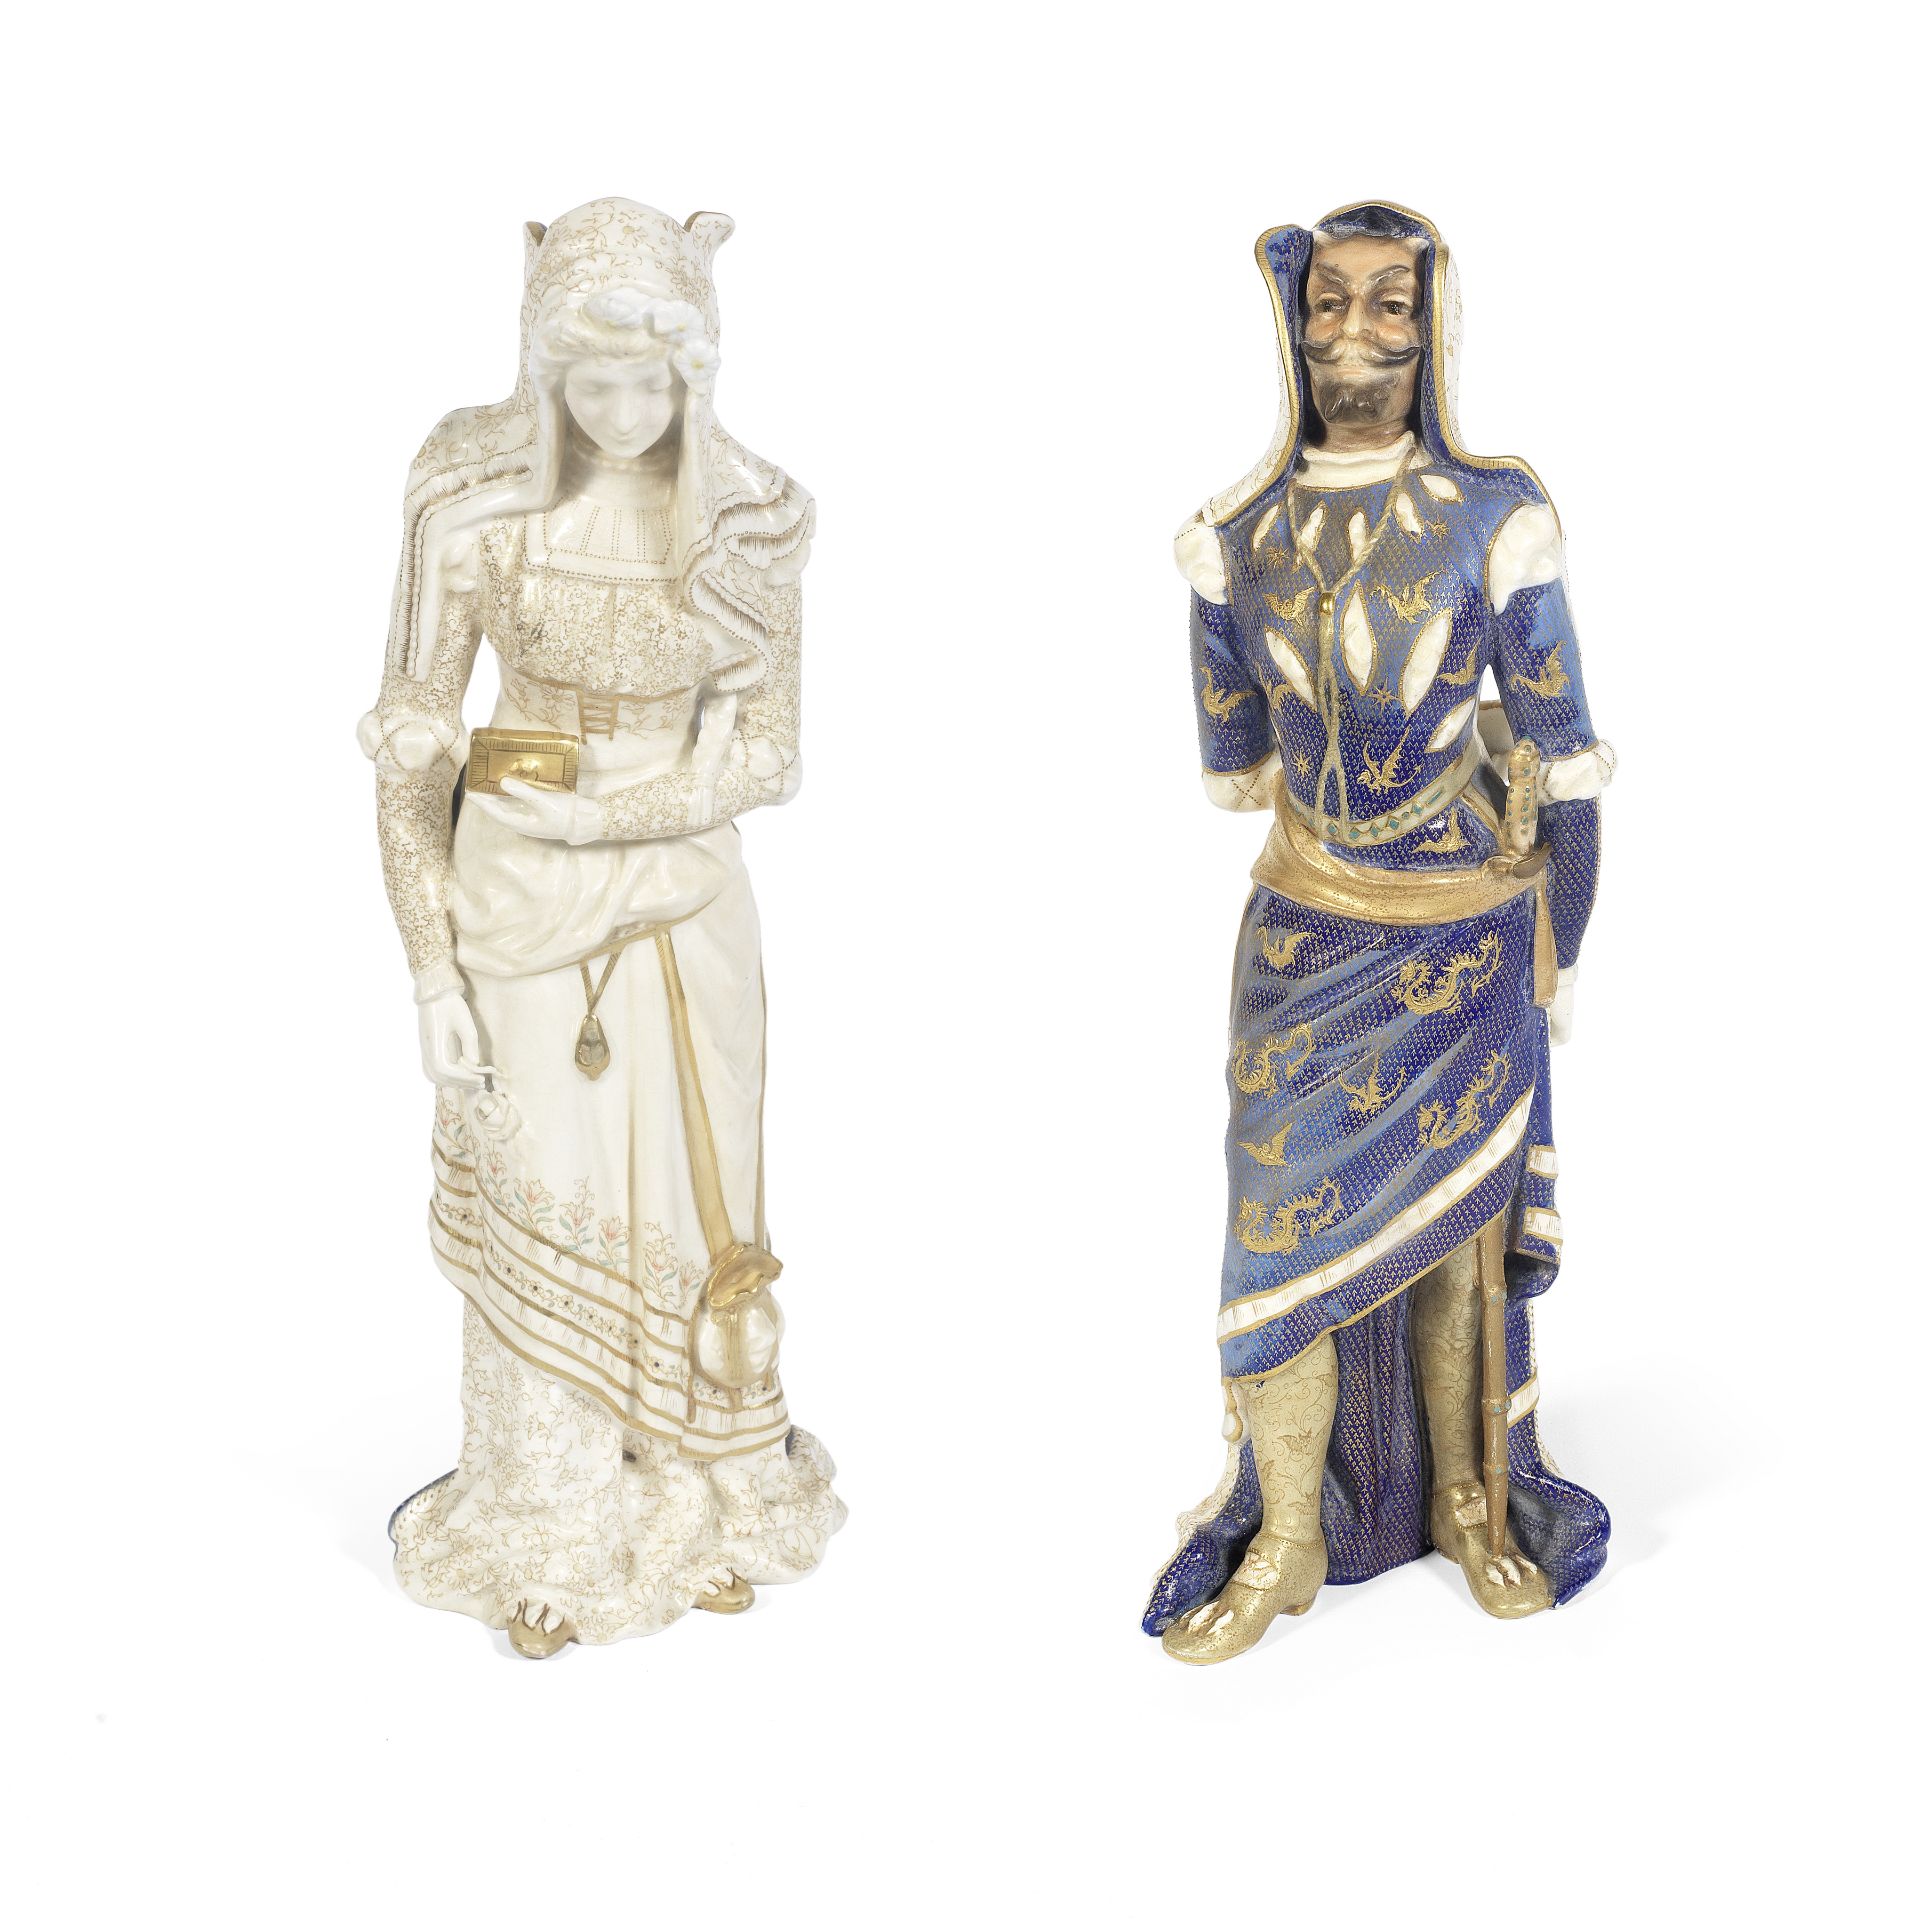 Charles Noke for Royal Doulton 'Mephistopheles & Marguerite': A Rare Double-Sided Exhibition Mode...